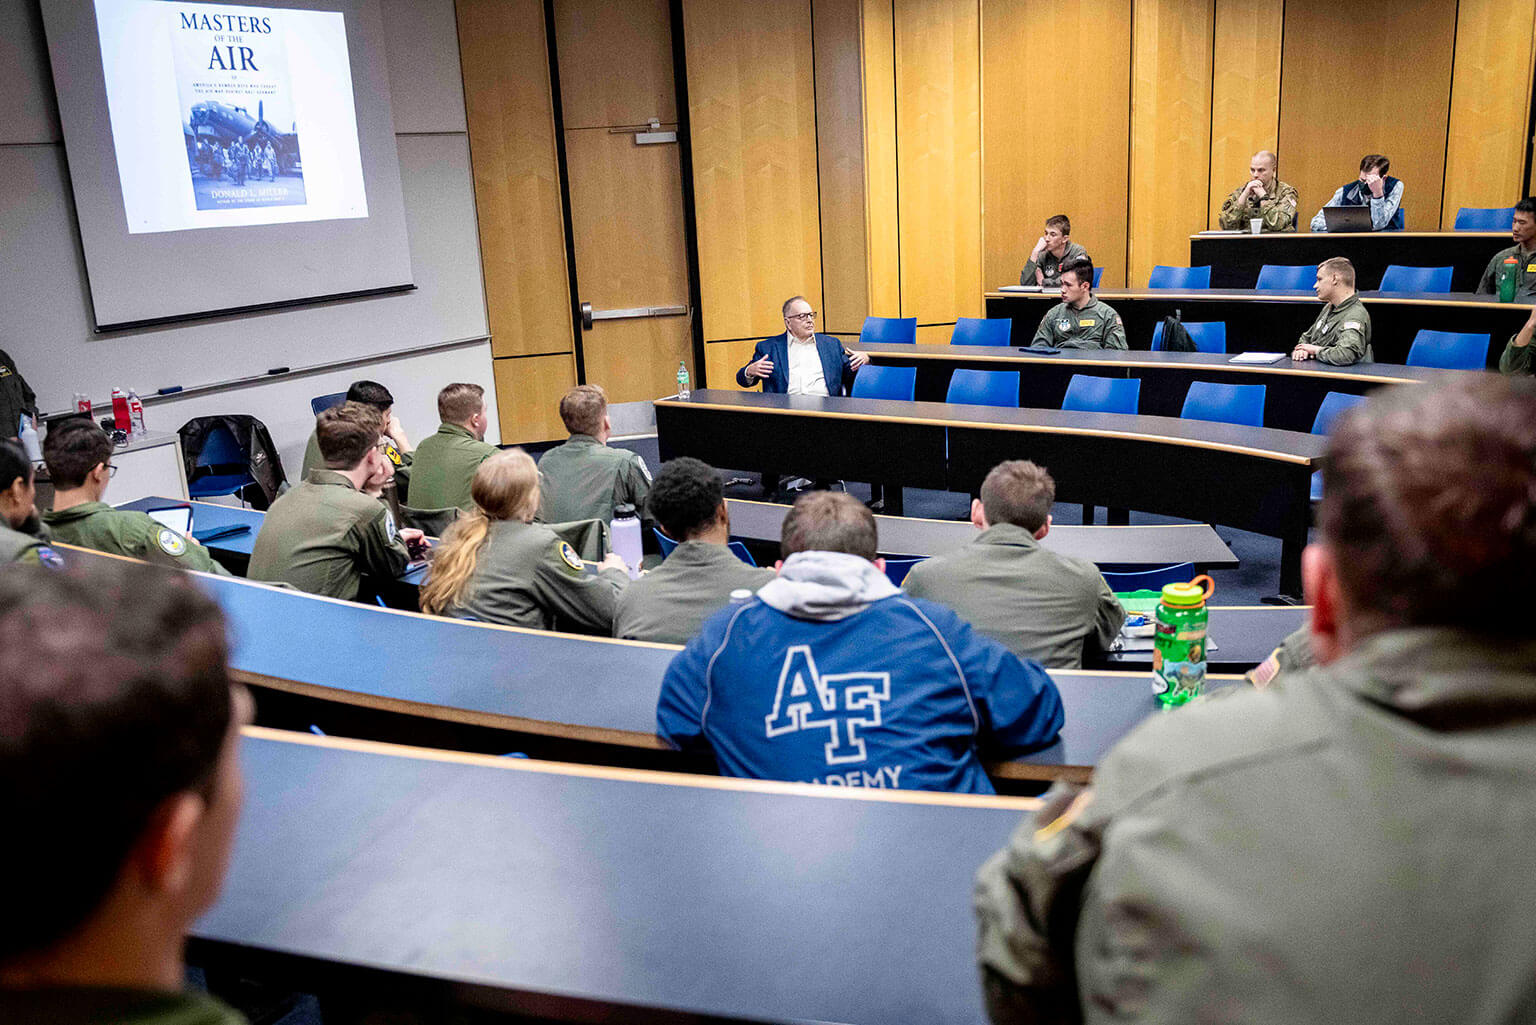 Cadets listen to Dr. Donald Miller’s lecture at the U.S. Air Force Academy.